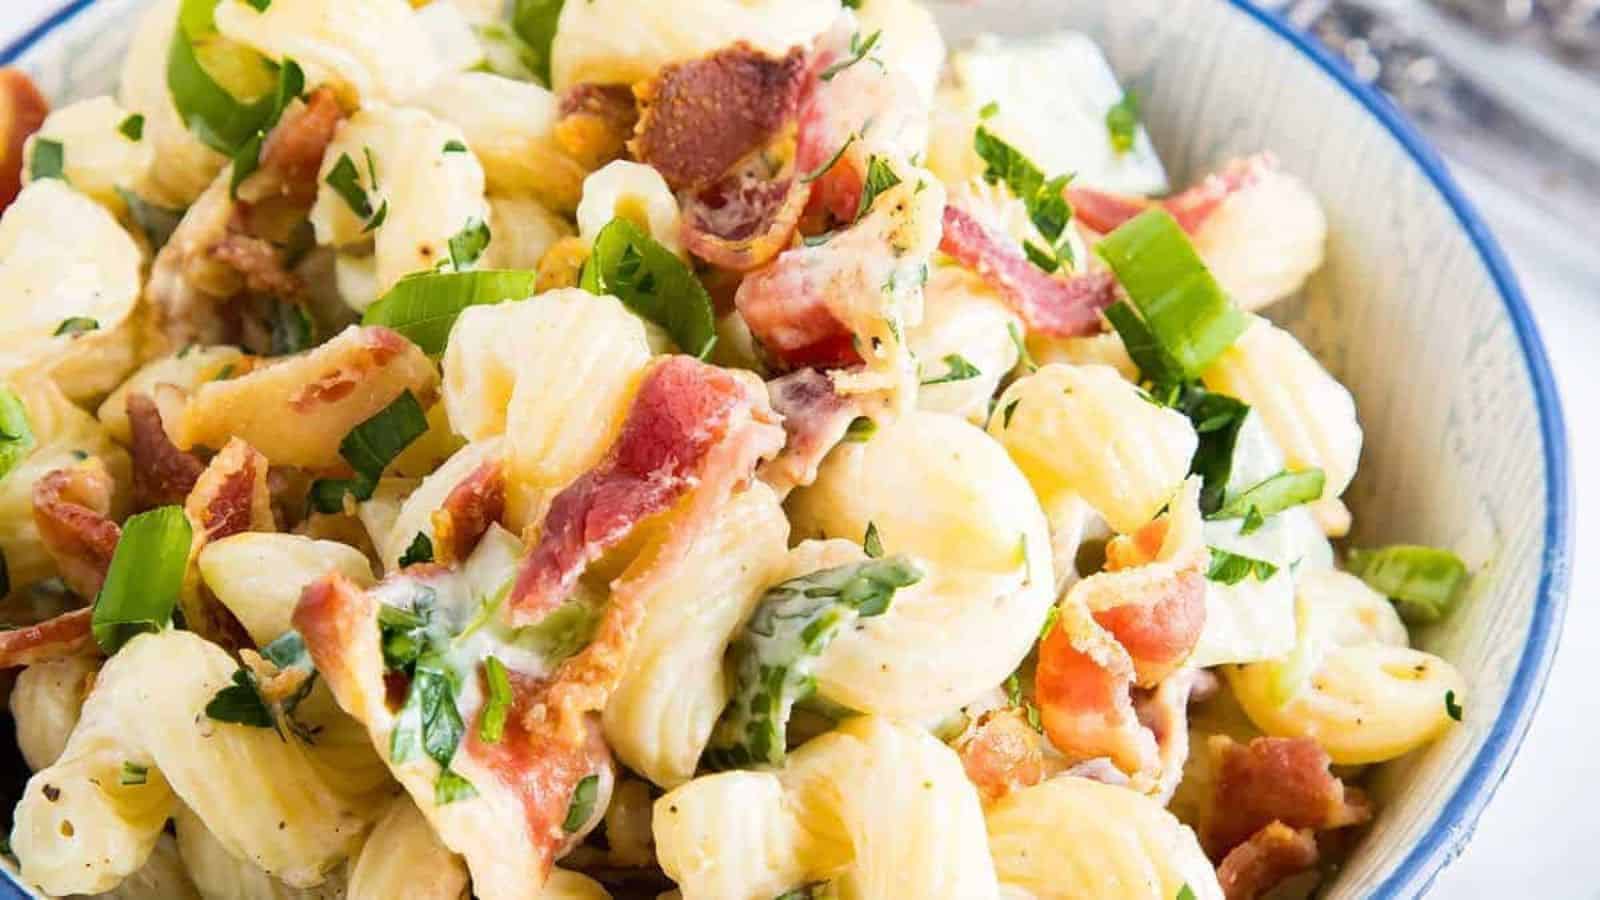 A close up image of pasta salad with bacon and green onions in a bowl.